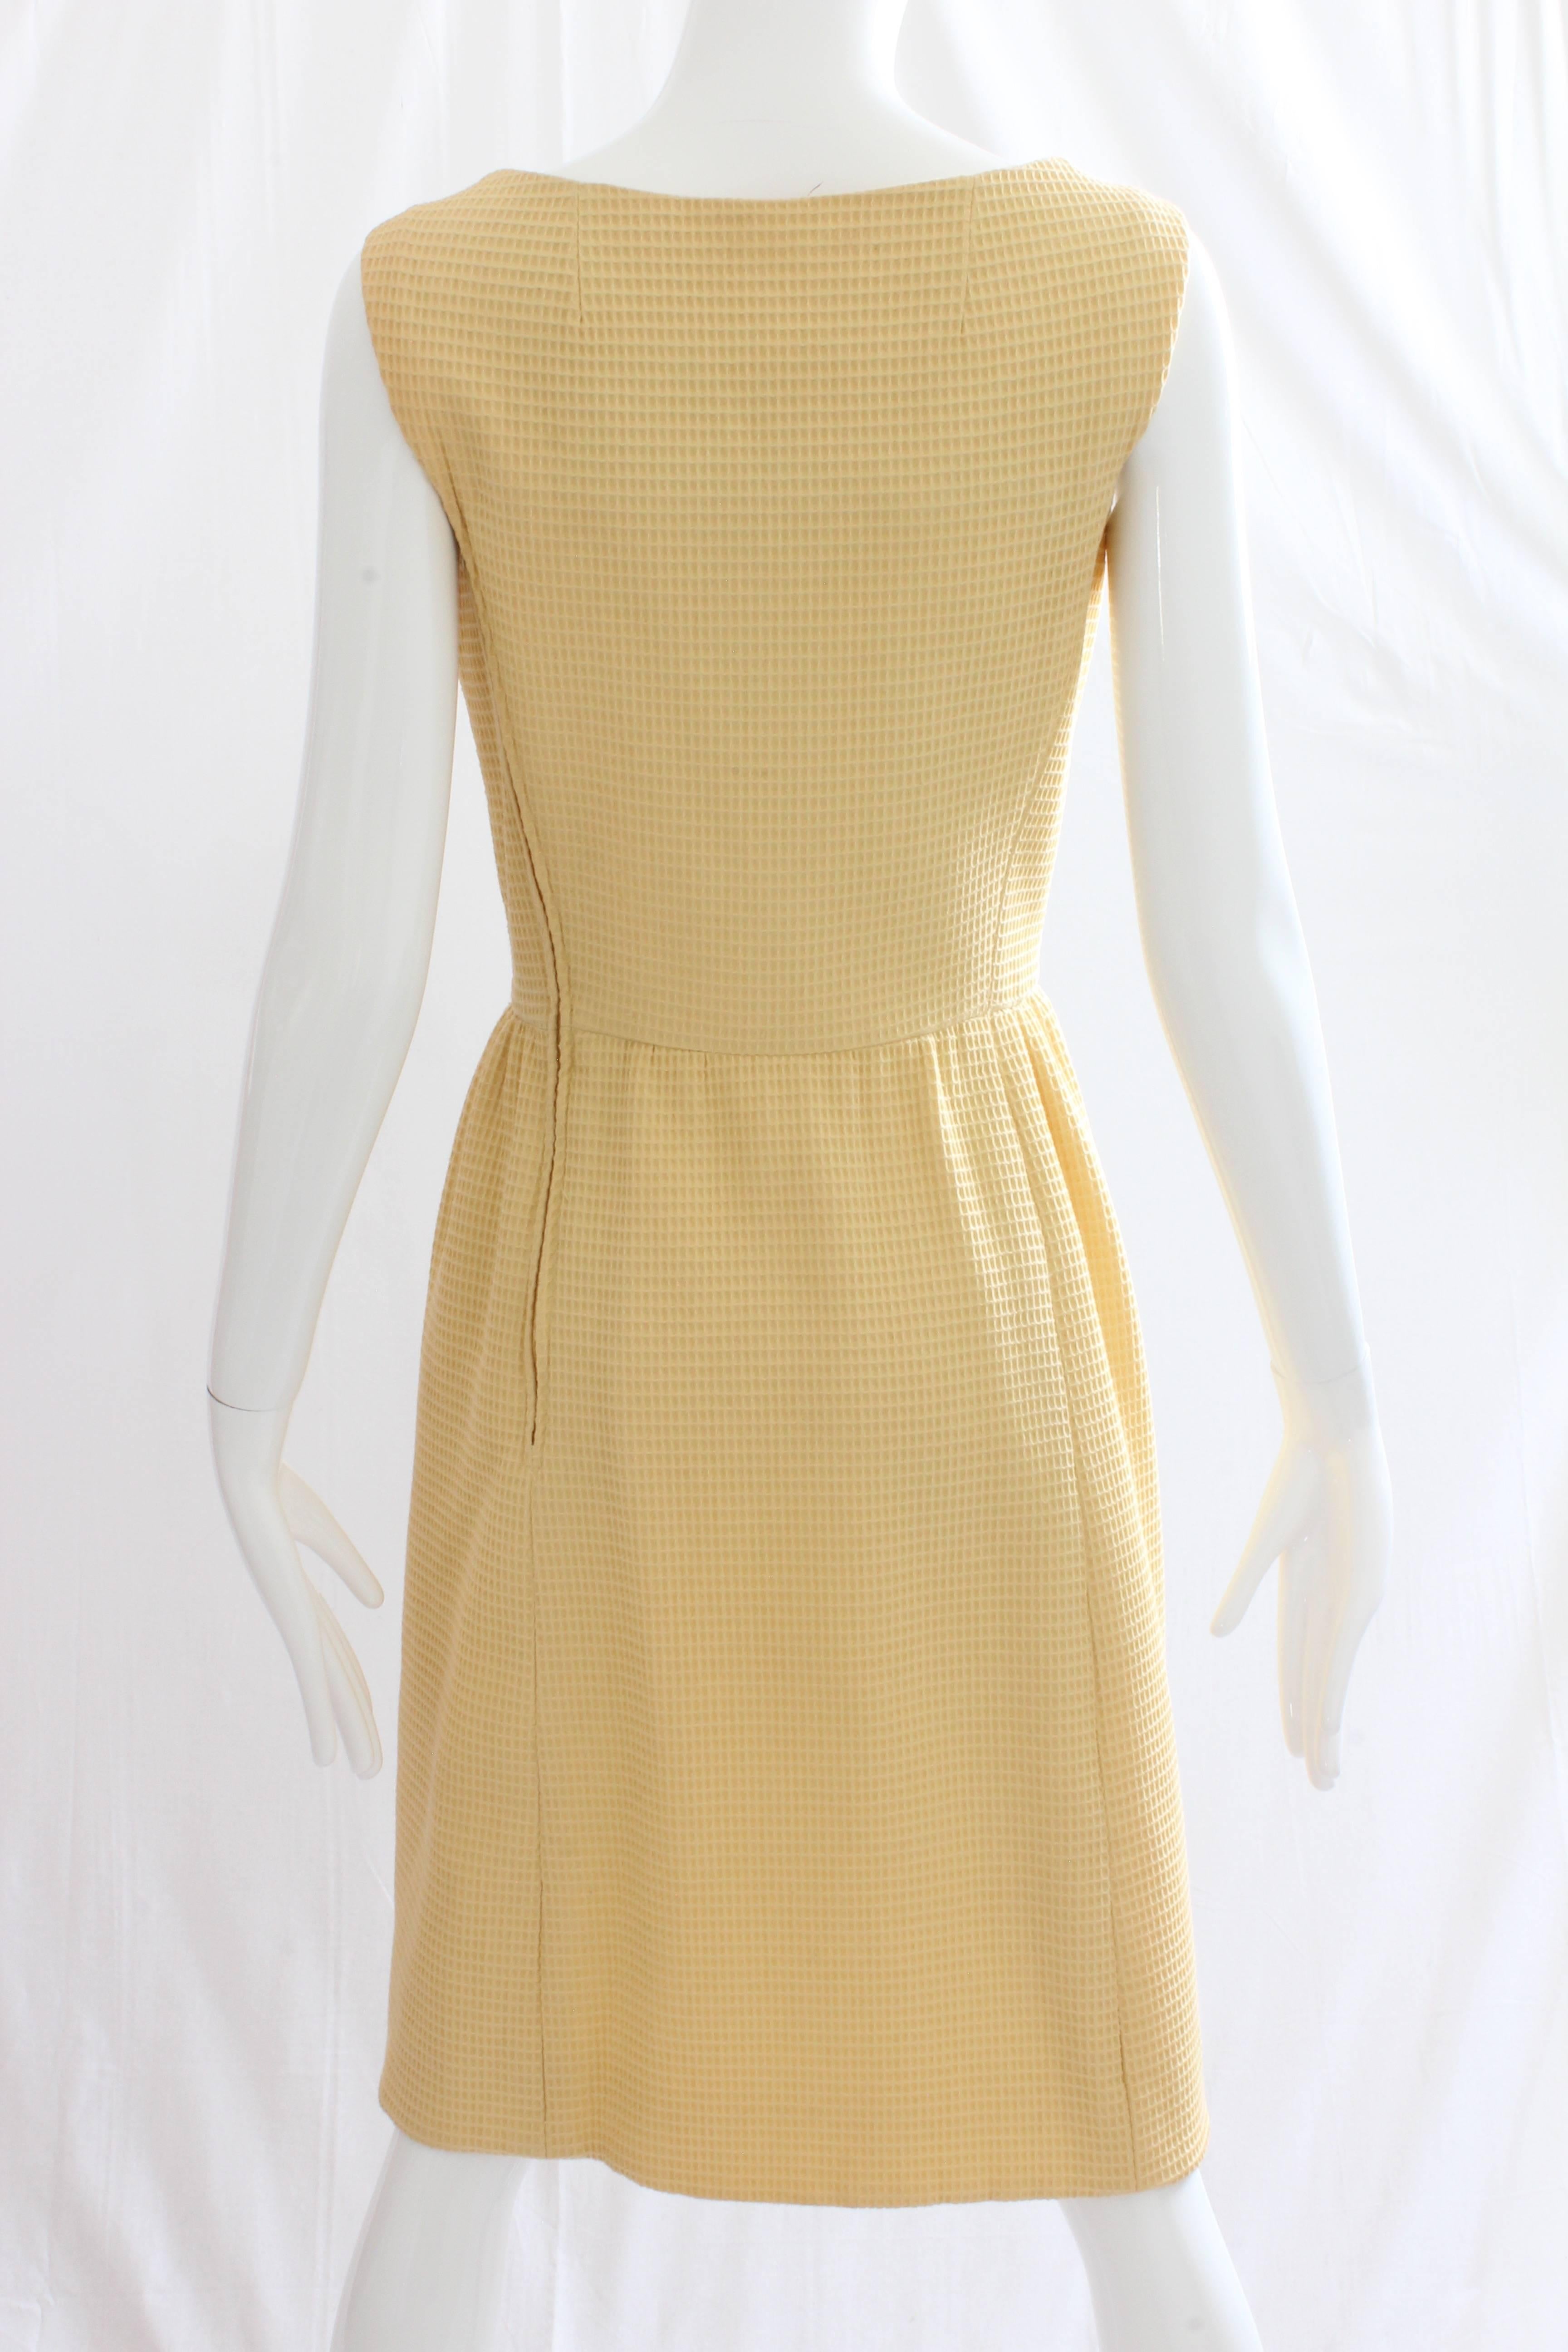 60s Chester Weinberg Jacket and Dress Ensemble 2pc Set Yellow Honeycomb Fabric S 3